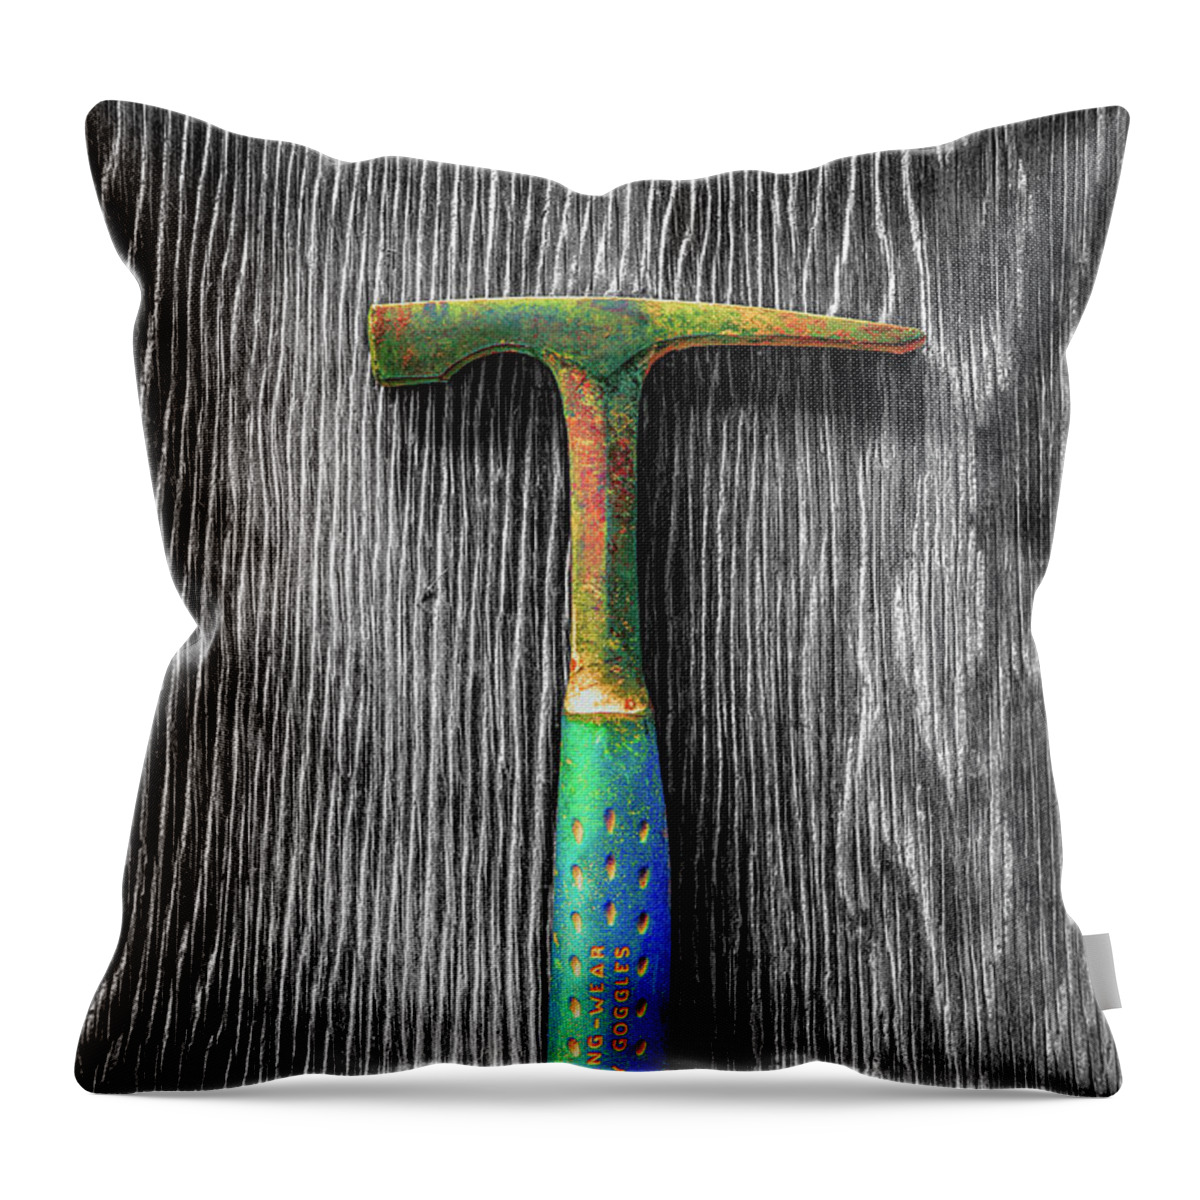 Art Throw Pillow featuring the photograph Tools On Wood 63 on BW by YoPedro